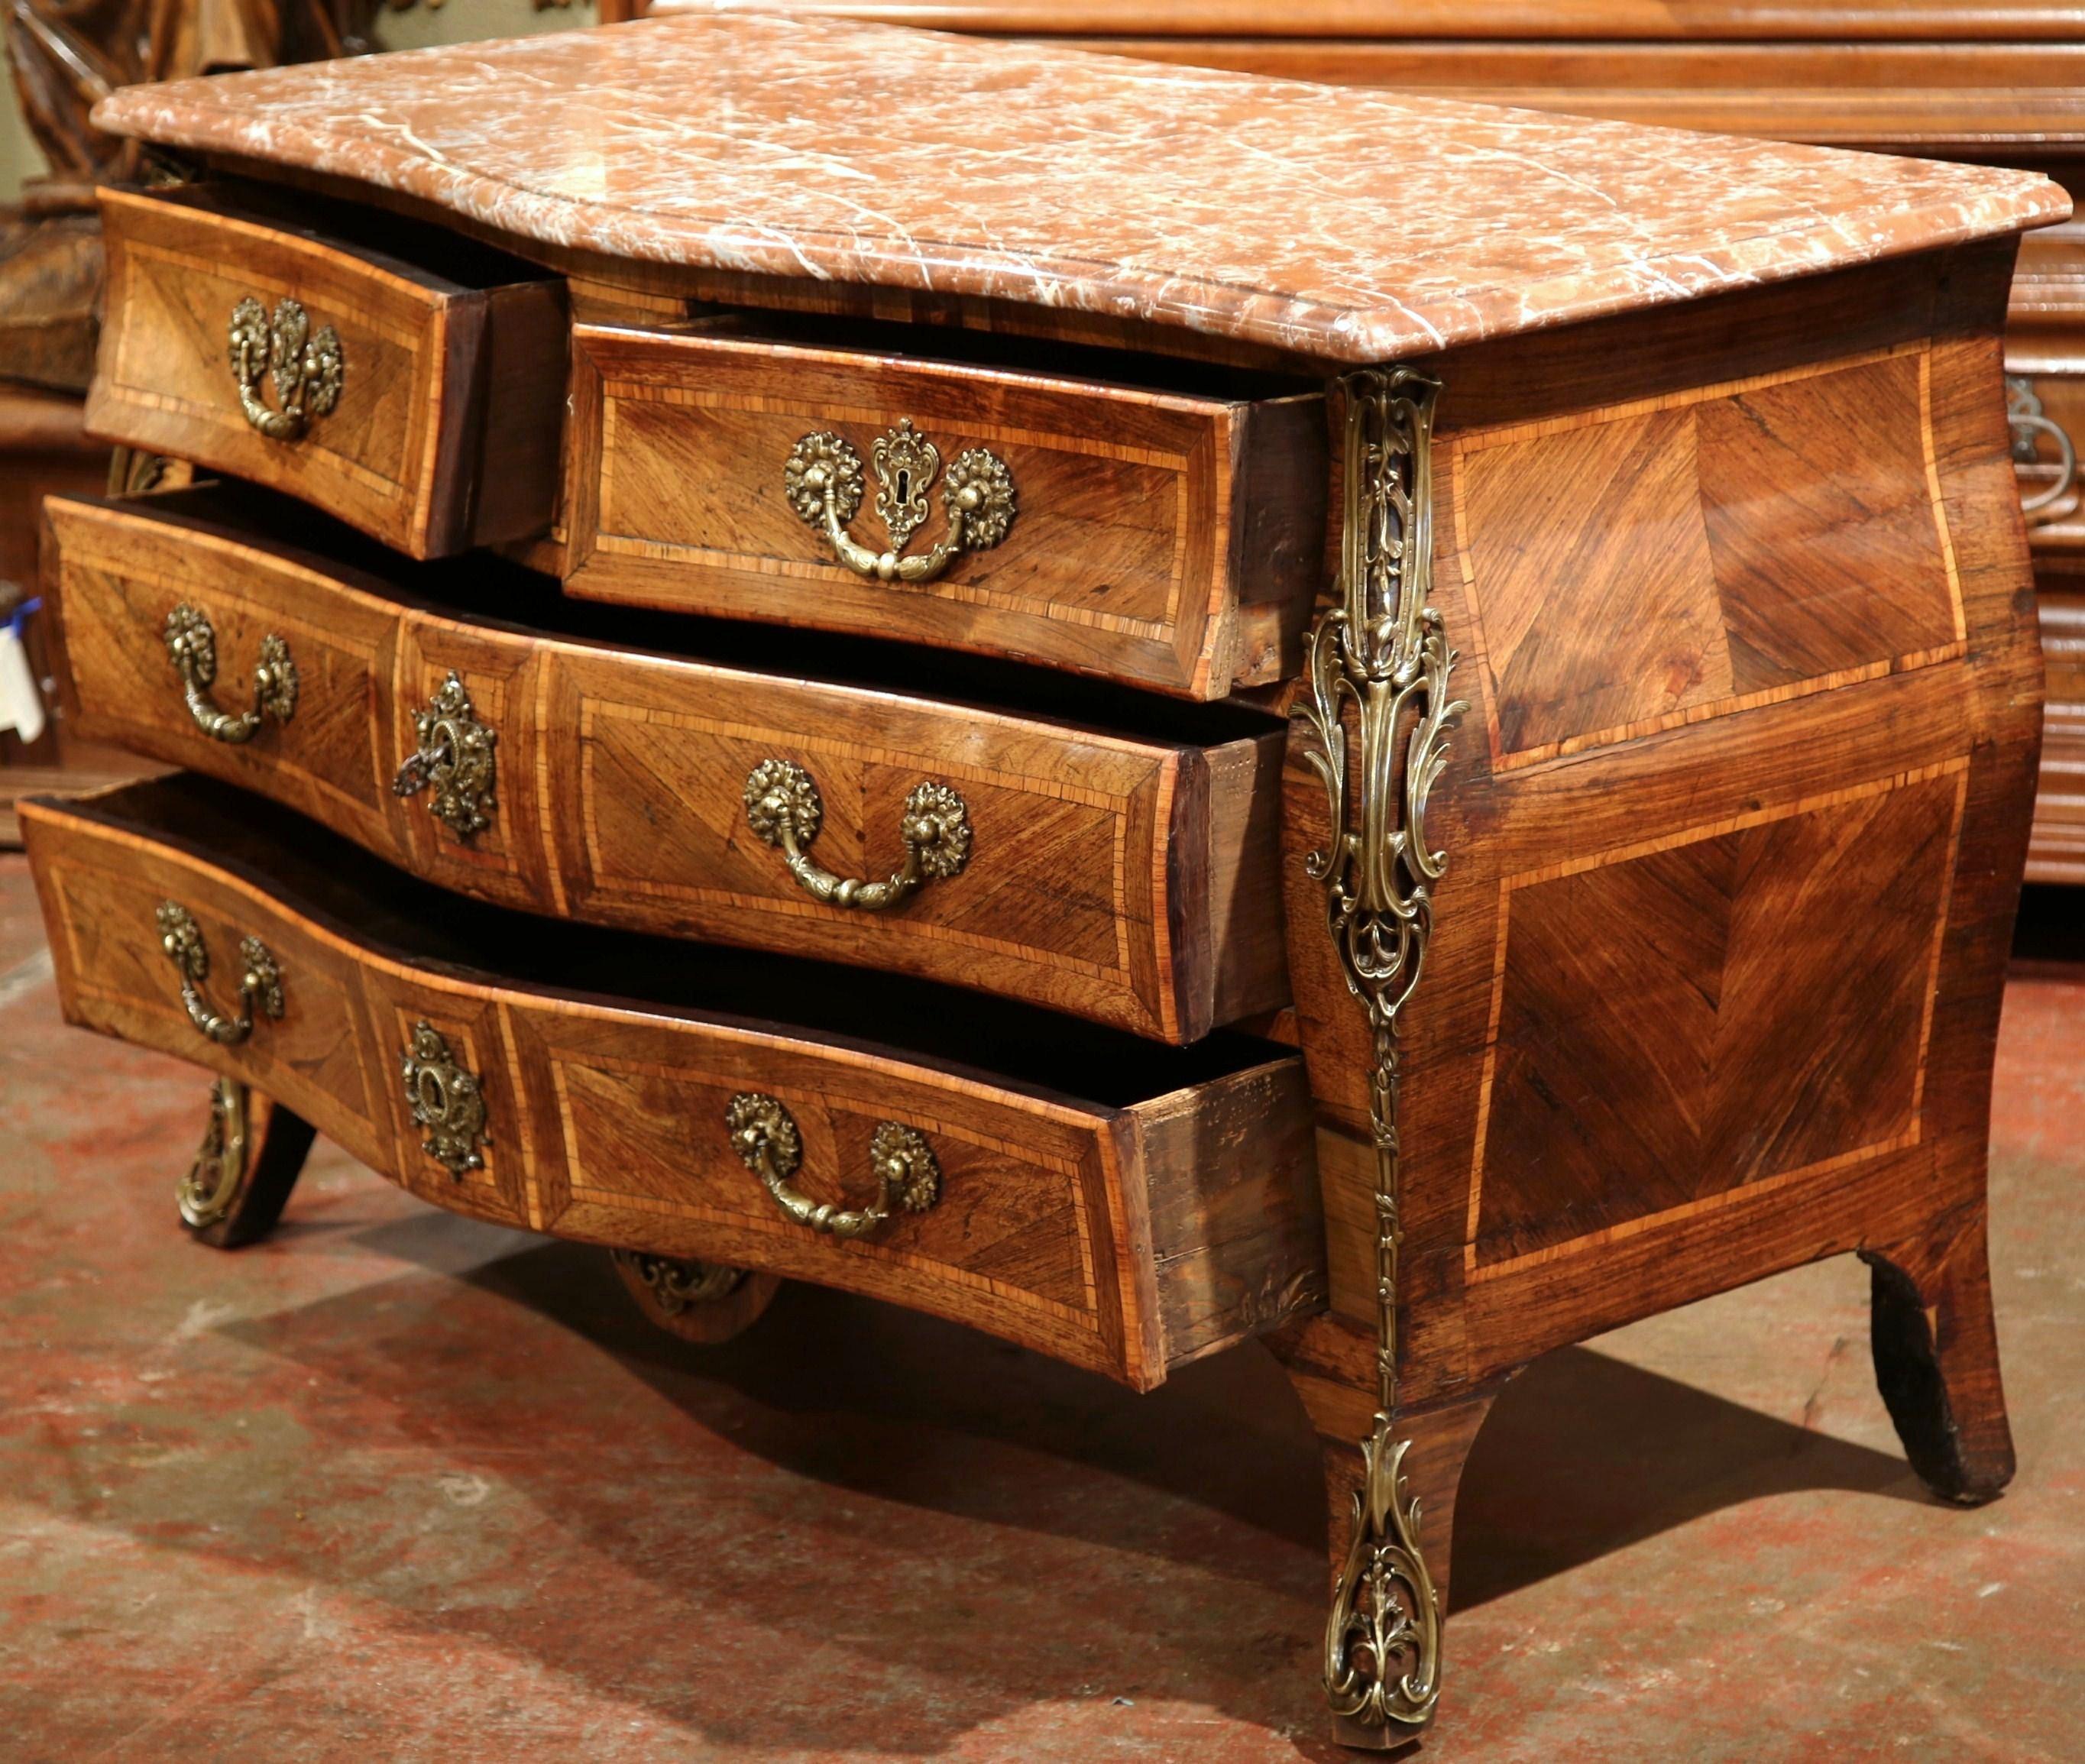 Bronze 18th Century French Louis XV Walnut Inlay Bombe Chest of Drawers with Marble Top For Sale